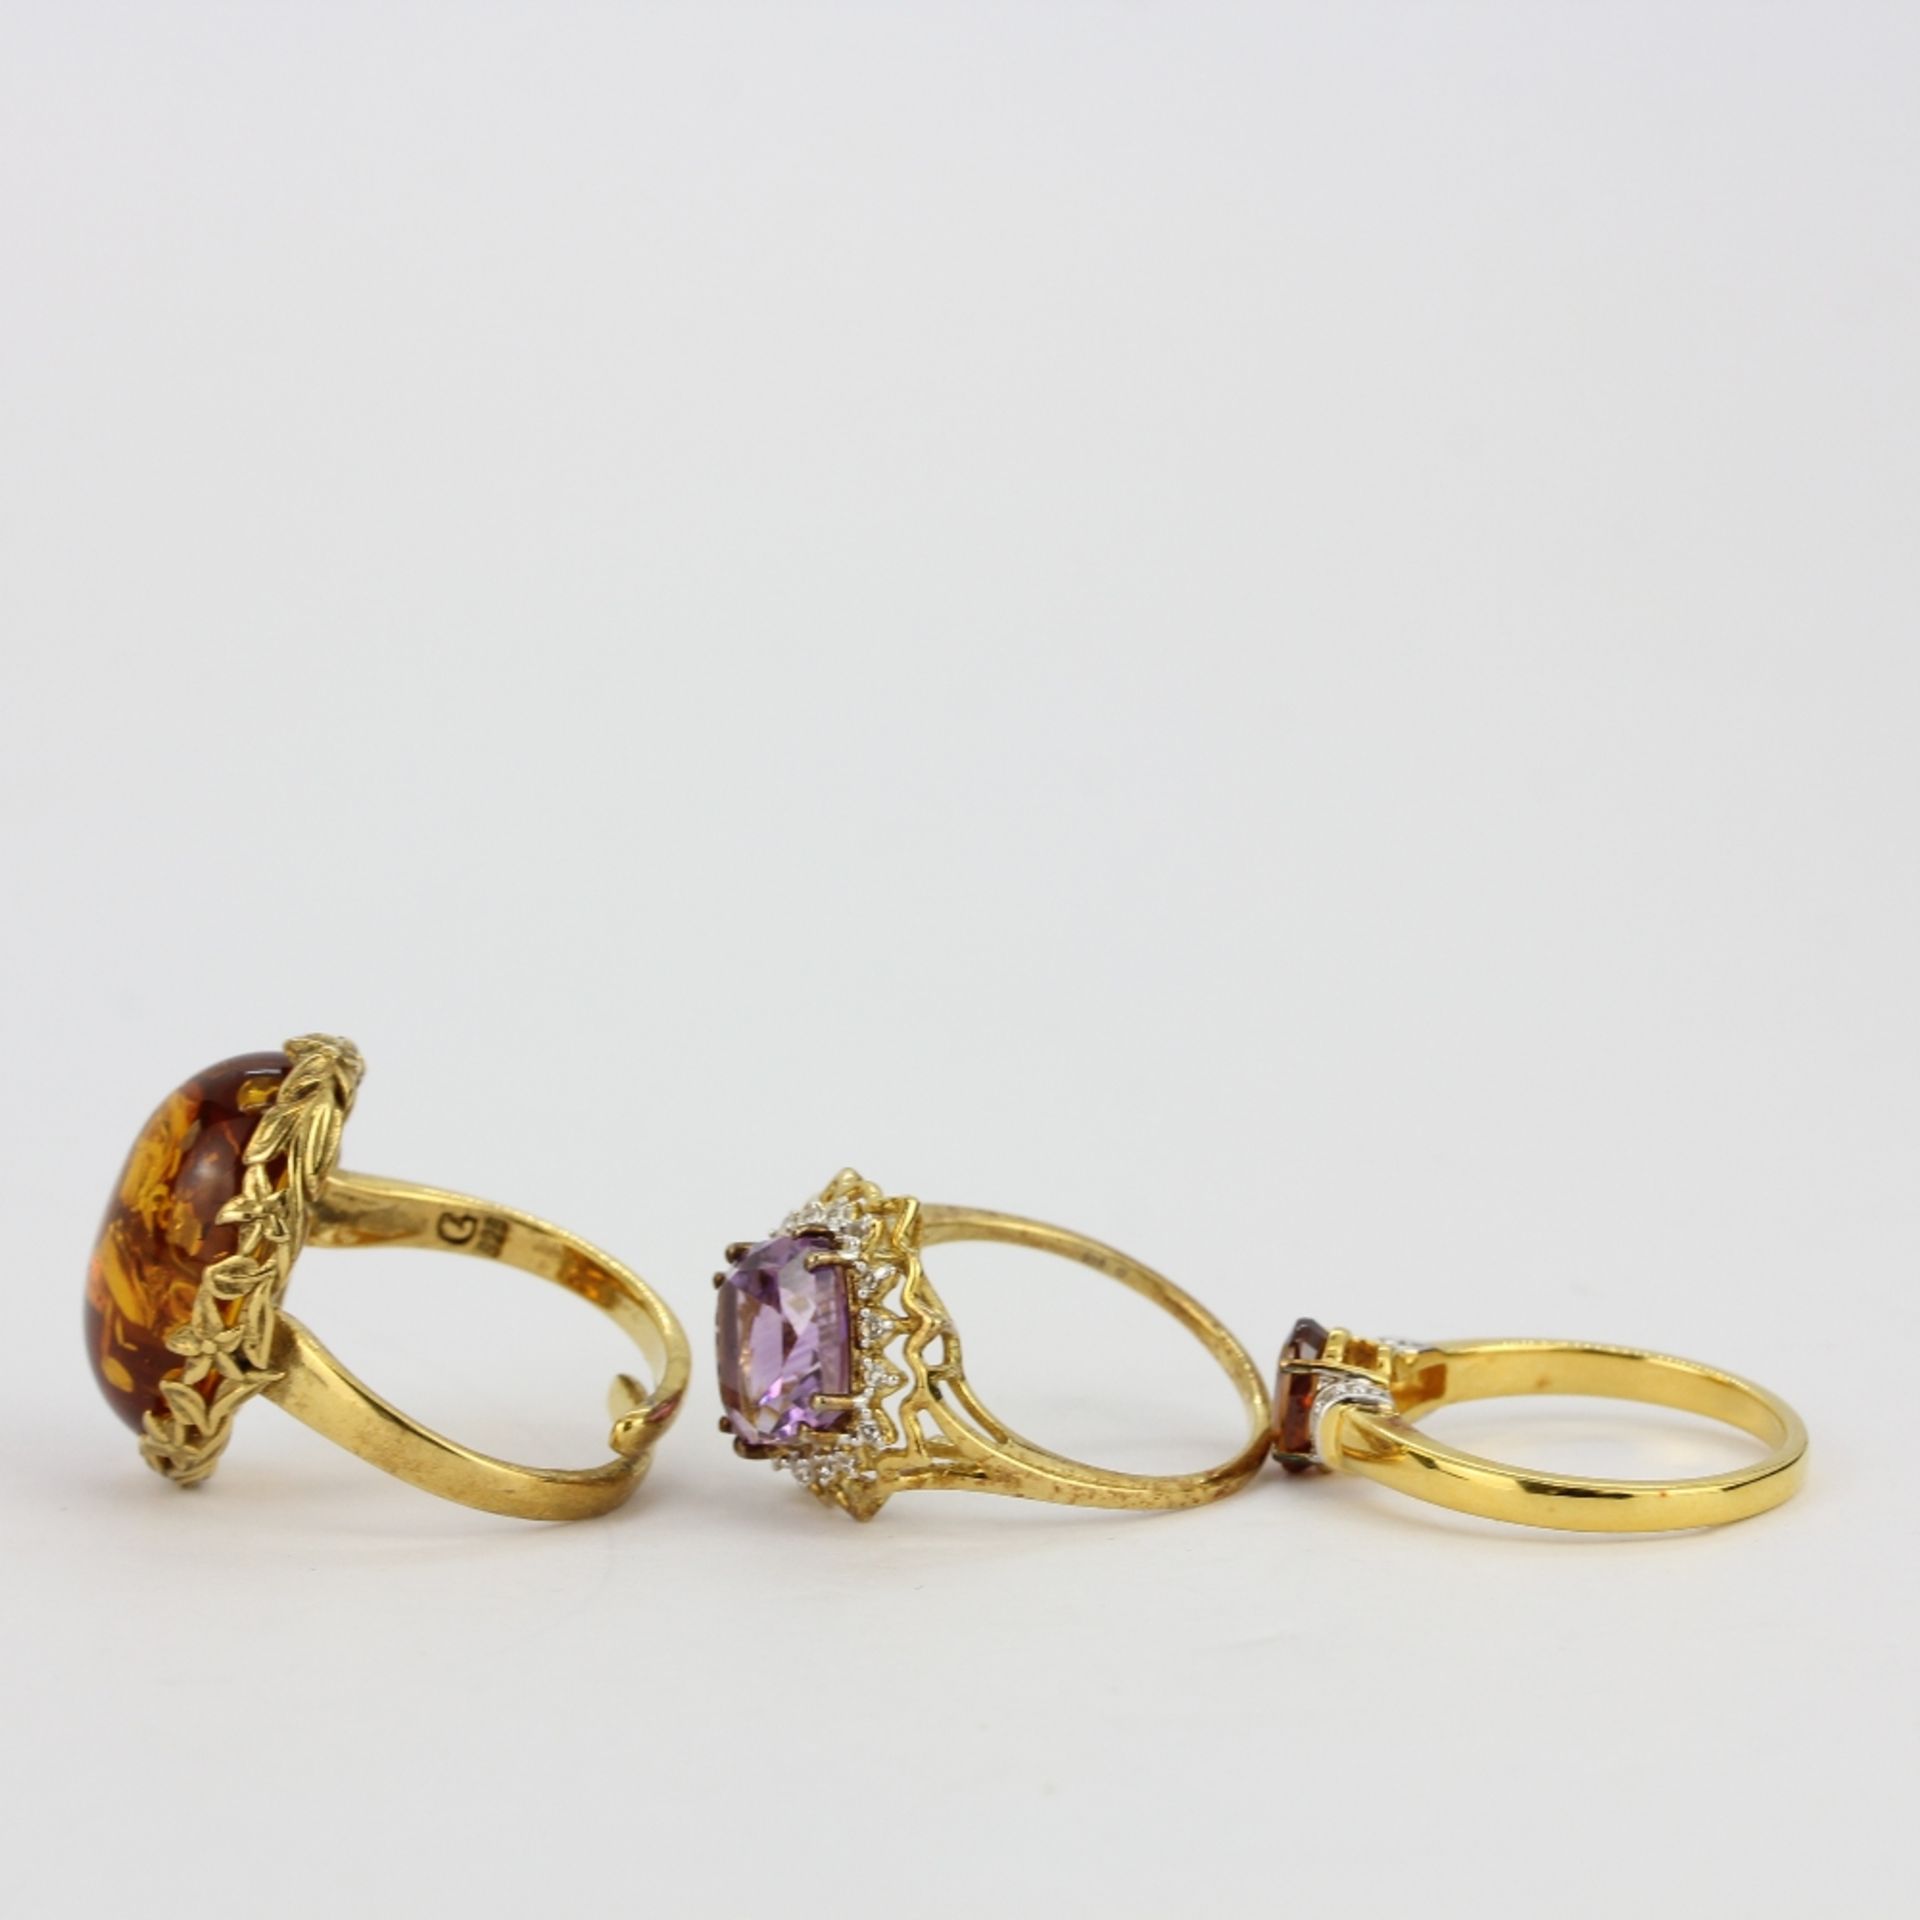 Three 925 silver gilt stone set rings including amber, amethyst and citrine. - Image 2 of 2